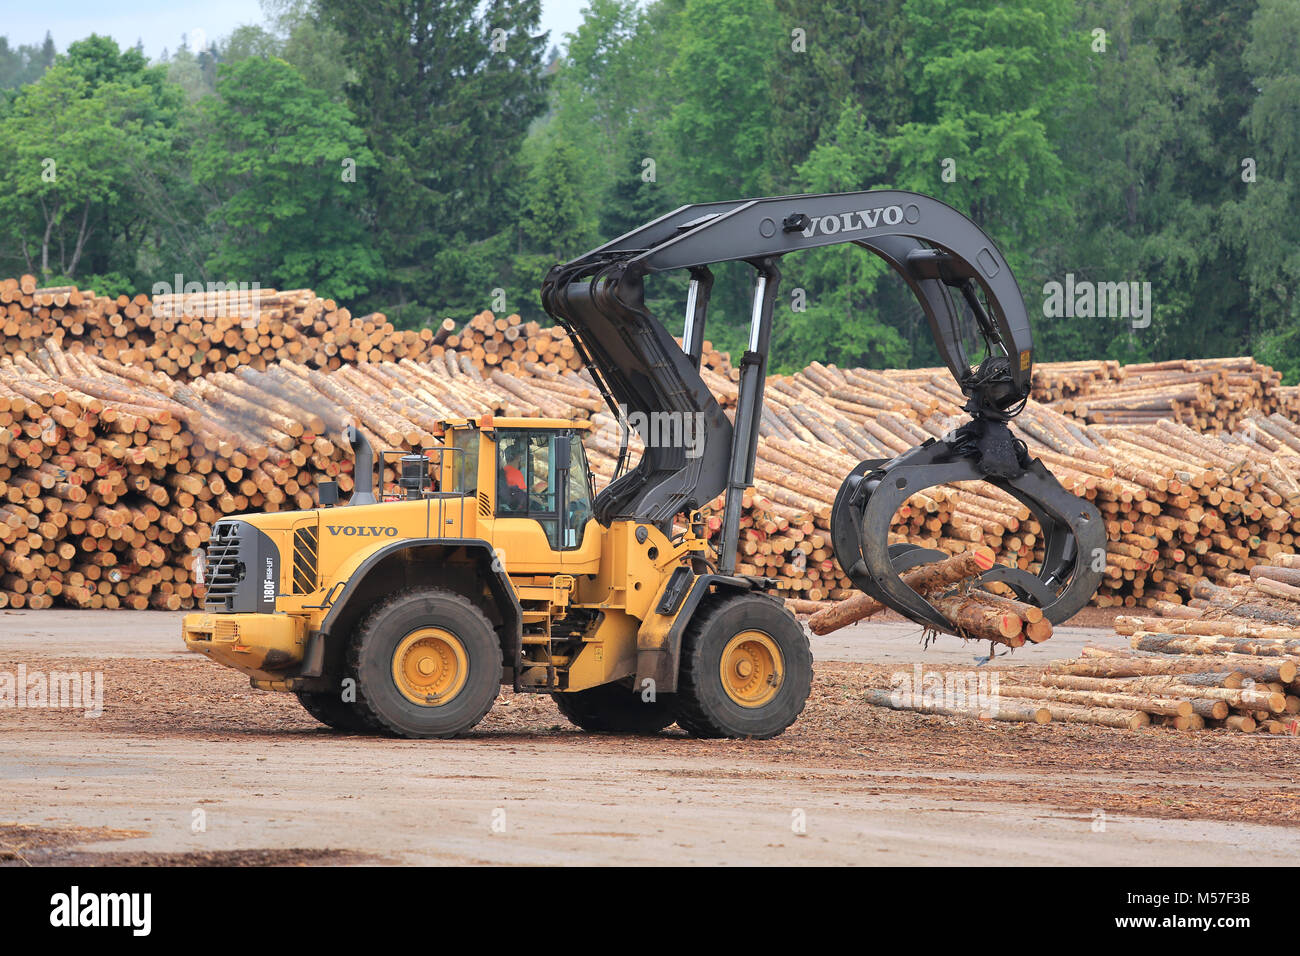 KYRO, FINLAND - JUNE 7, 2014: Volvo L180F High Lift wheel loader working at sawmill lumber yard.  The L180F has a new lift arm design for improved lif Stock Photo